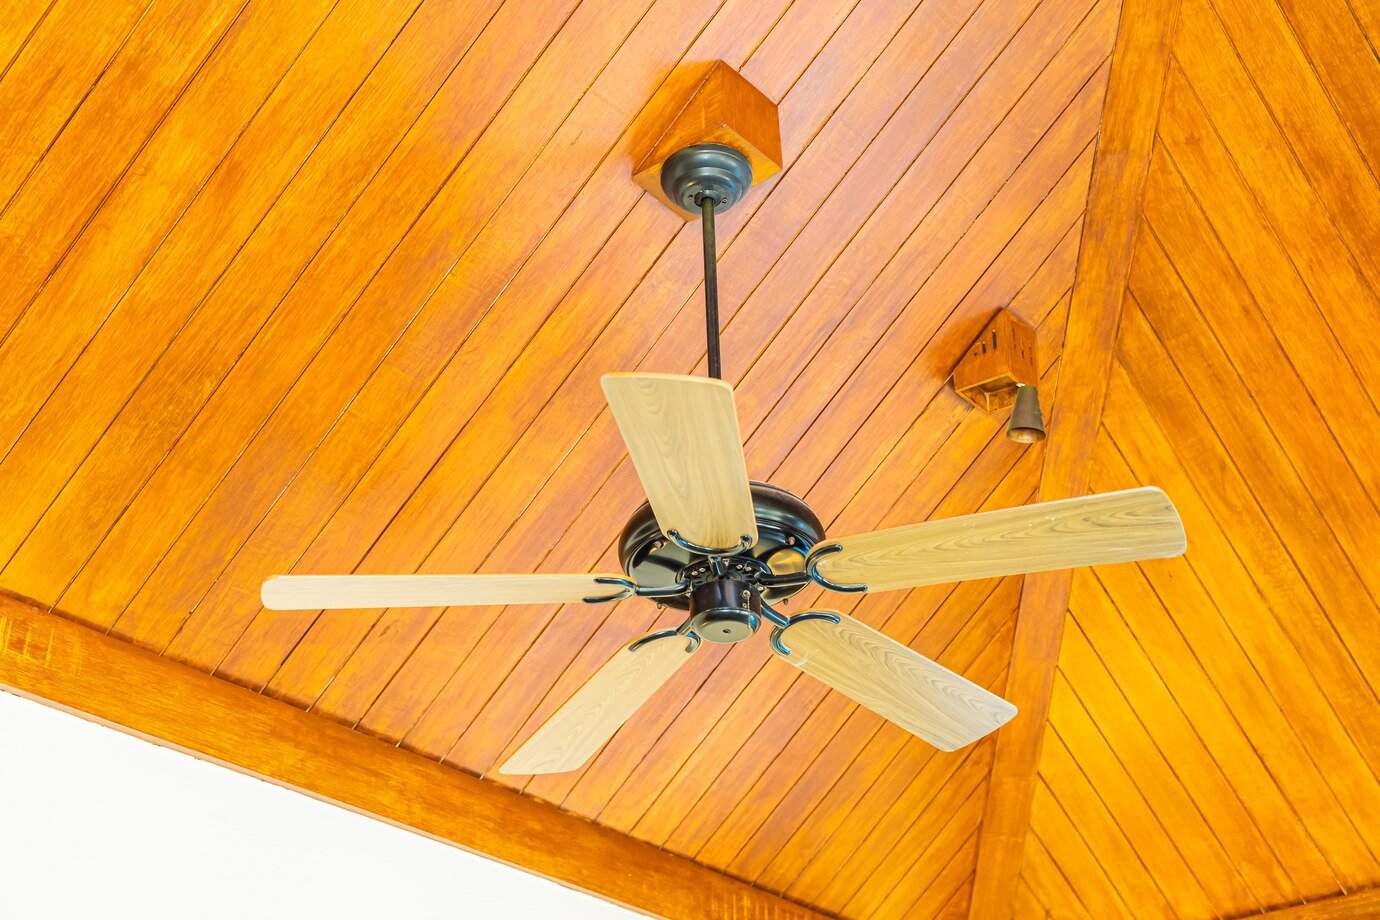 How to Install a Ceiling Fan. Image by lifeforstock on Freepik